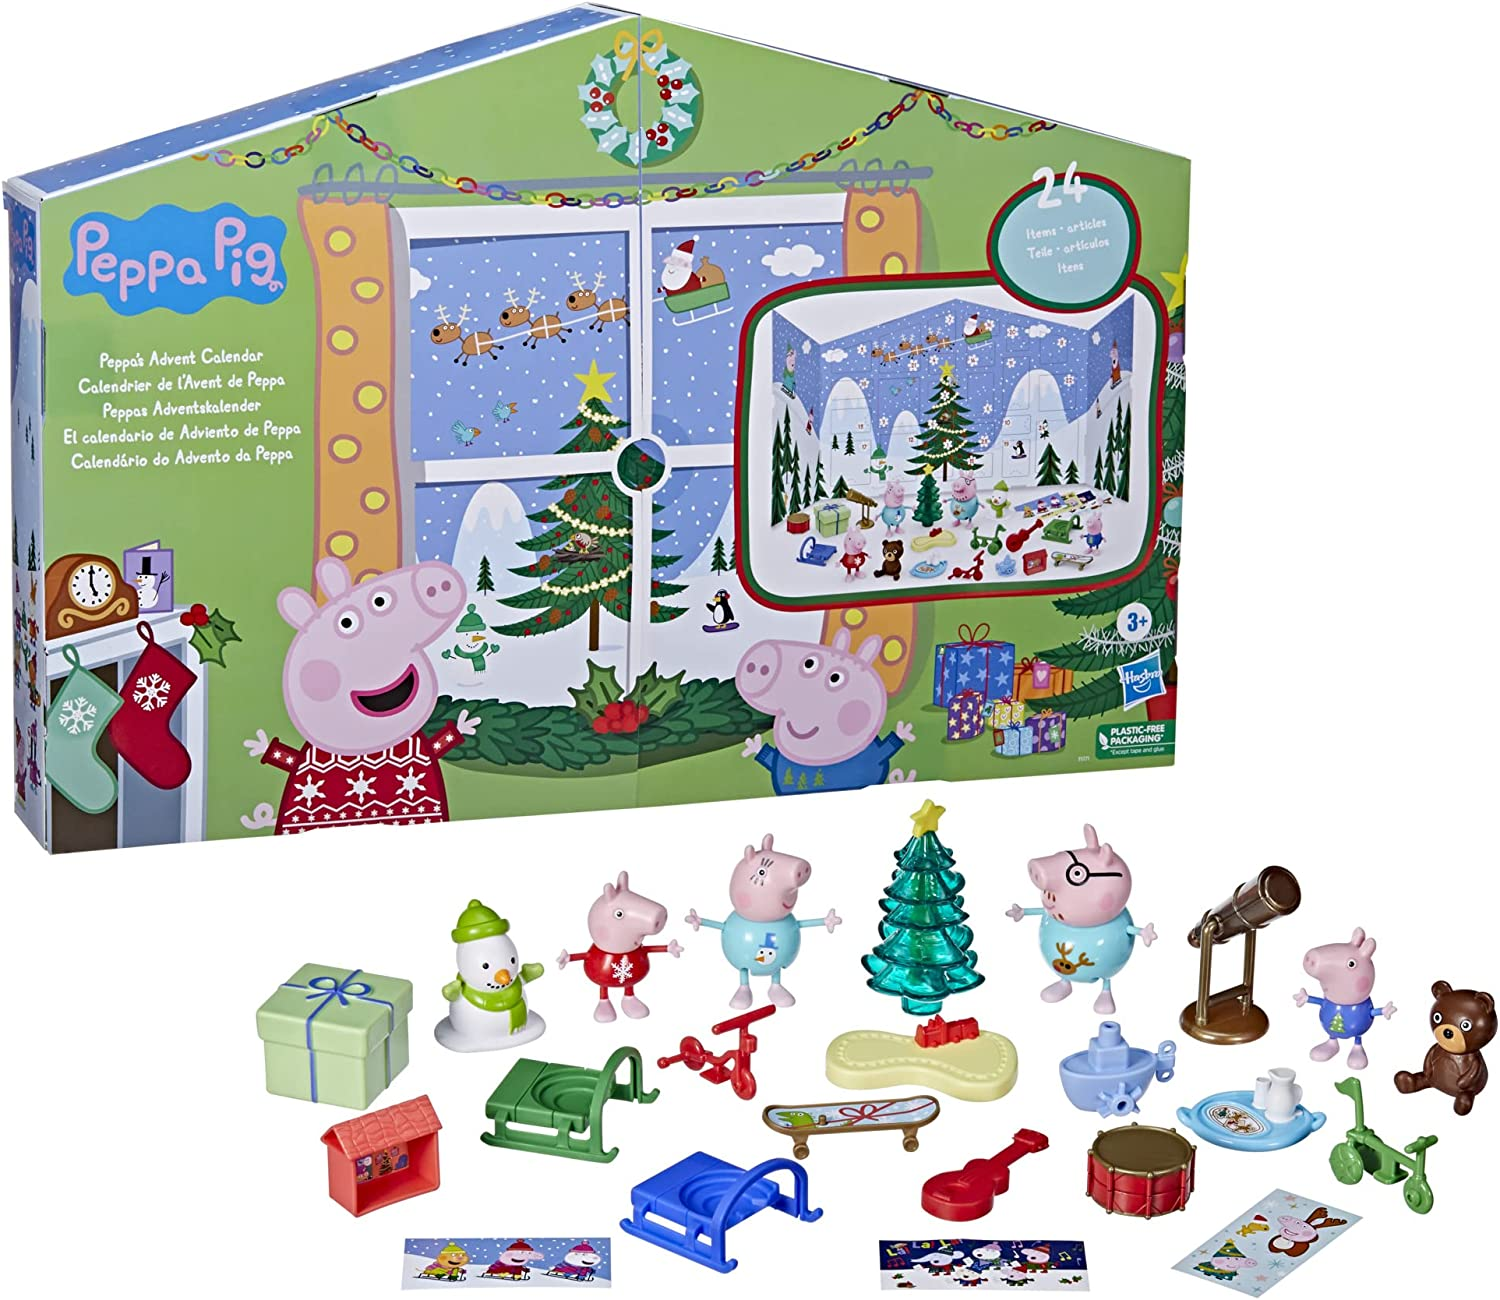 2022 Peppa Pig Advent Calendar Winter Wonderland With Peppa And The